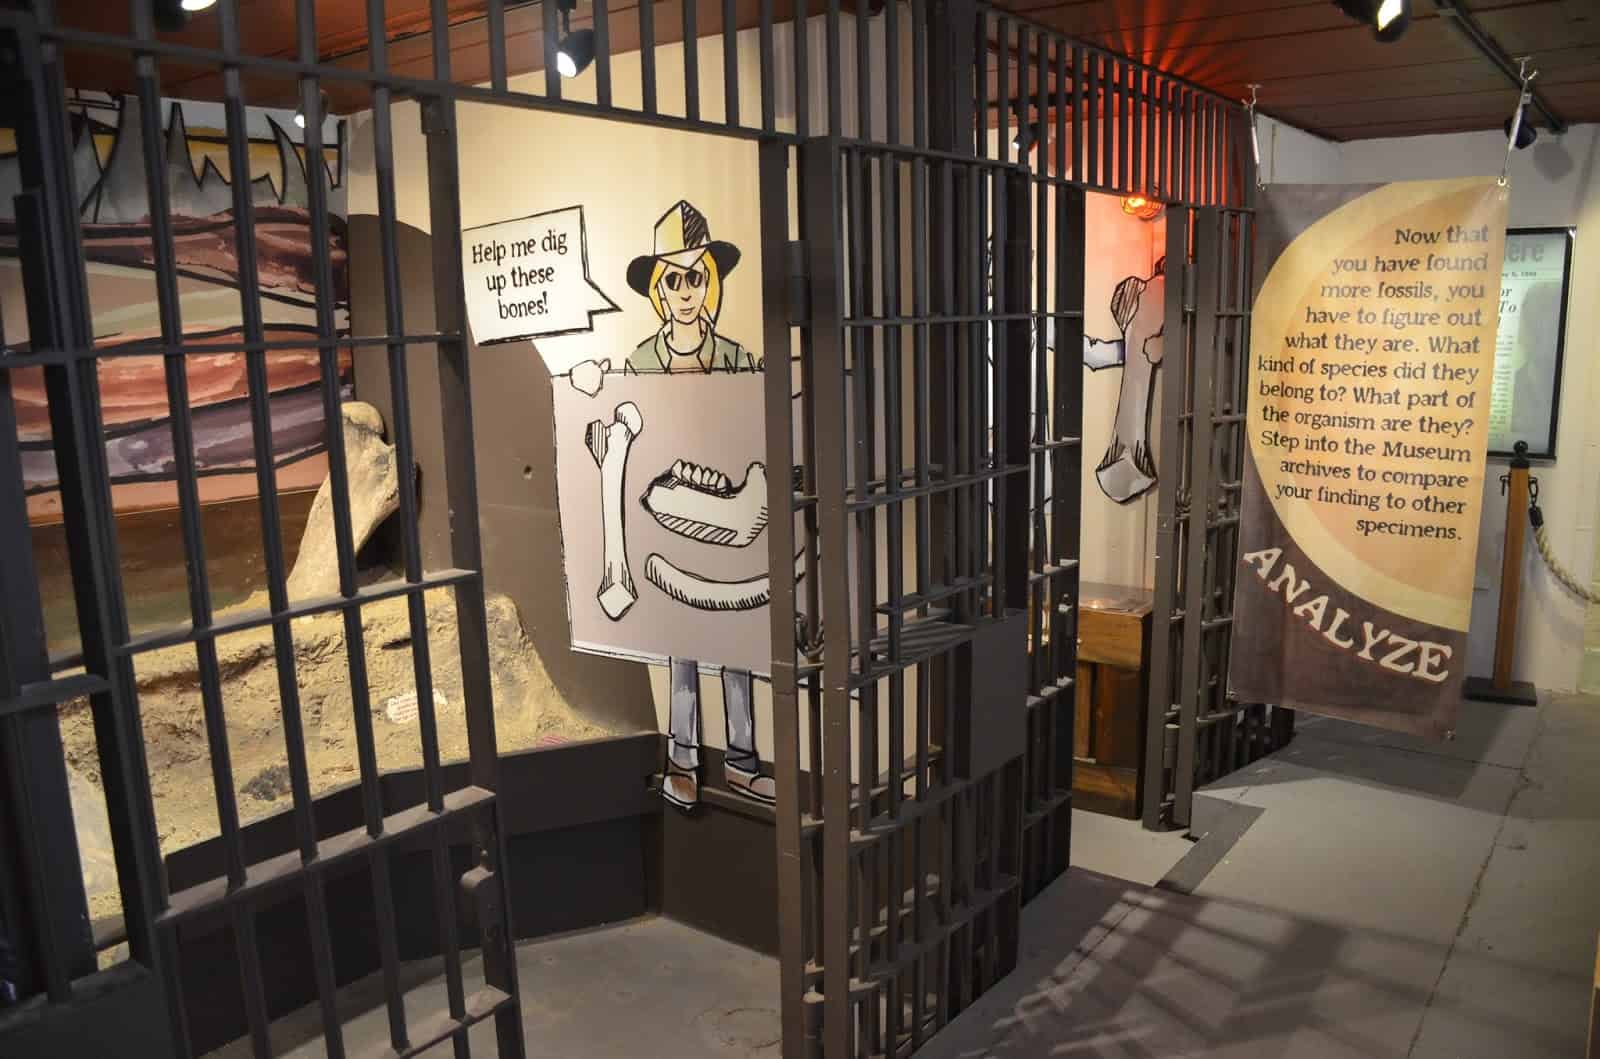 Jail cells used for exhibits